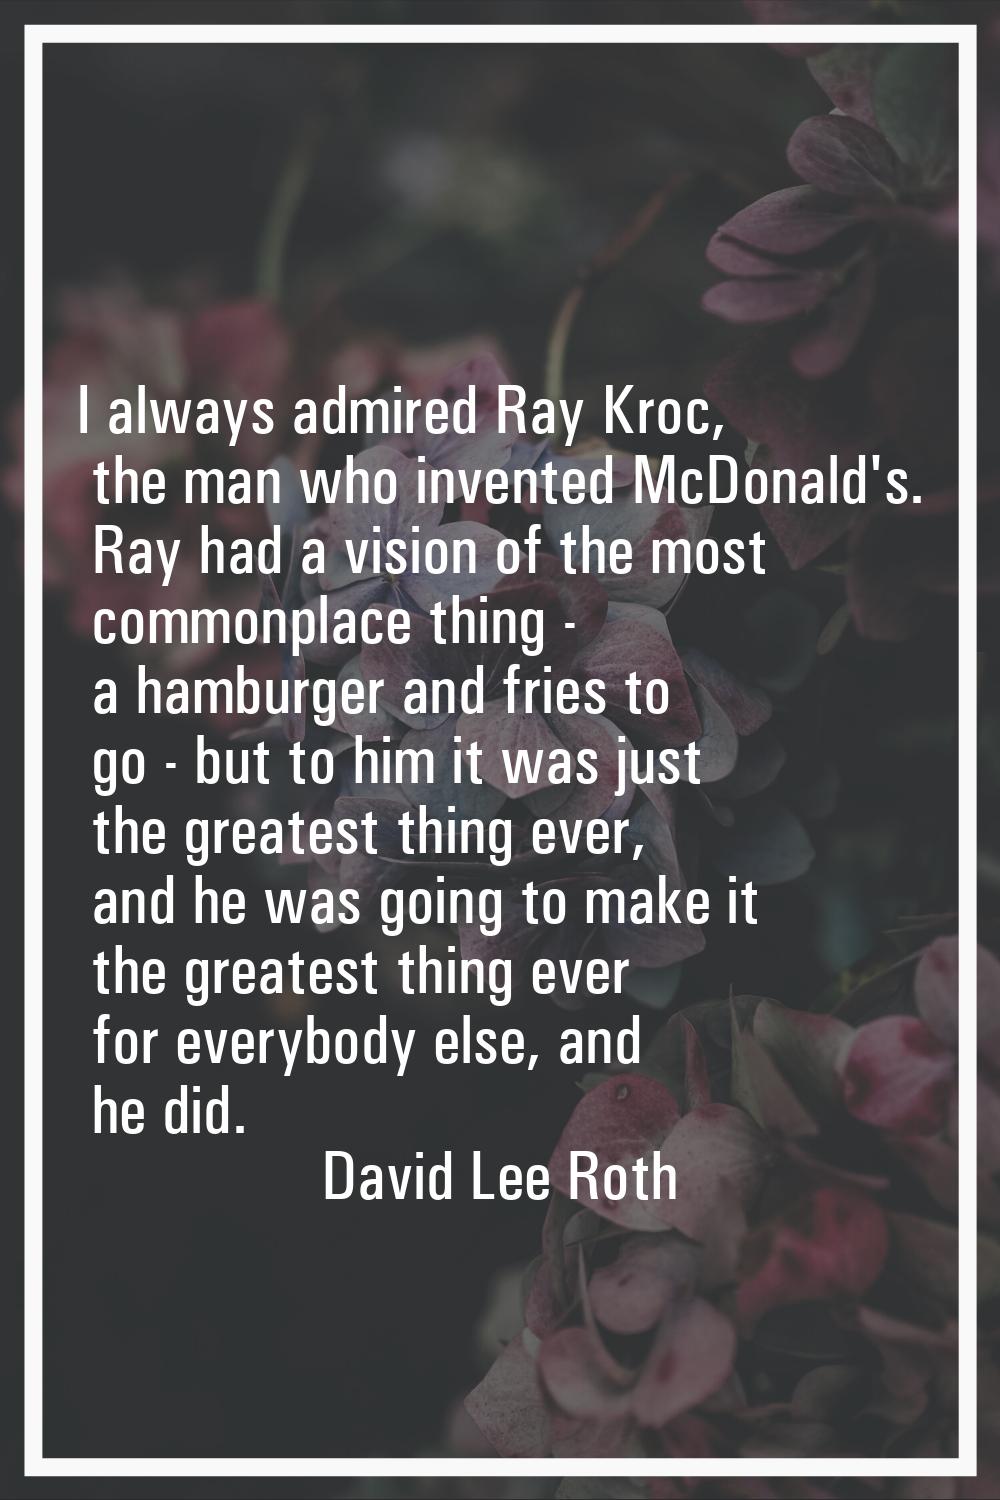 I always admired Ray Kroc, the man who invented McDonald's. Ray had a vision of the most commonplac